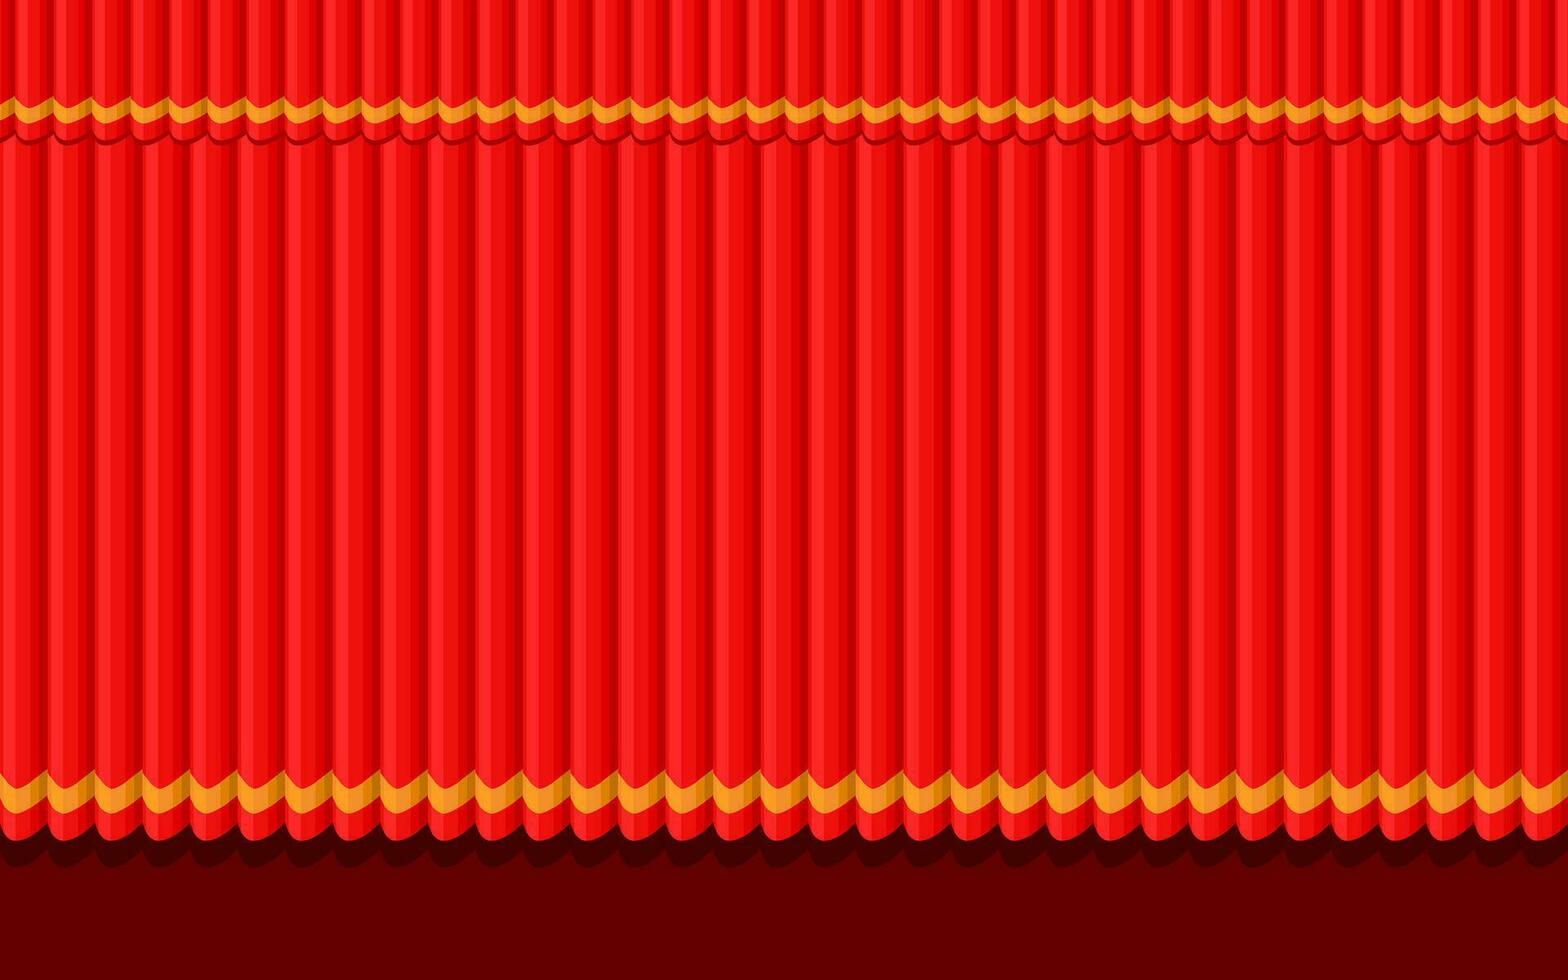 Closed Red Curtain Background vector